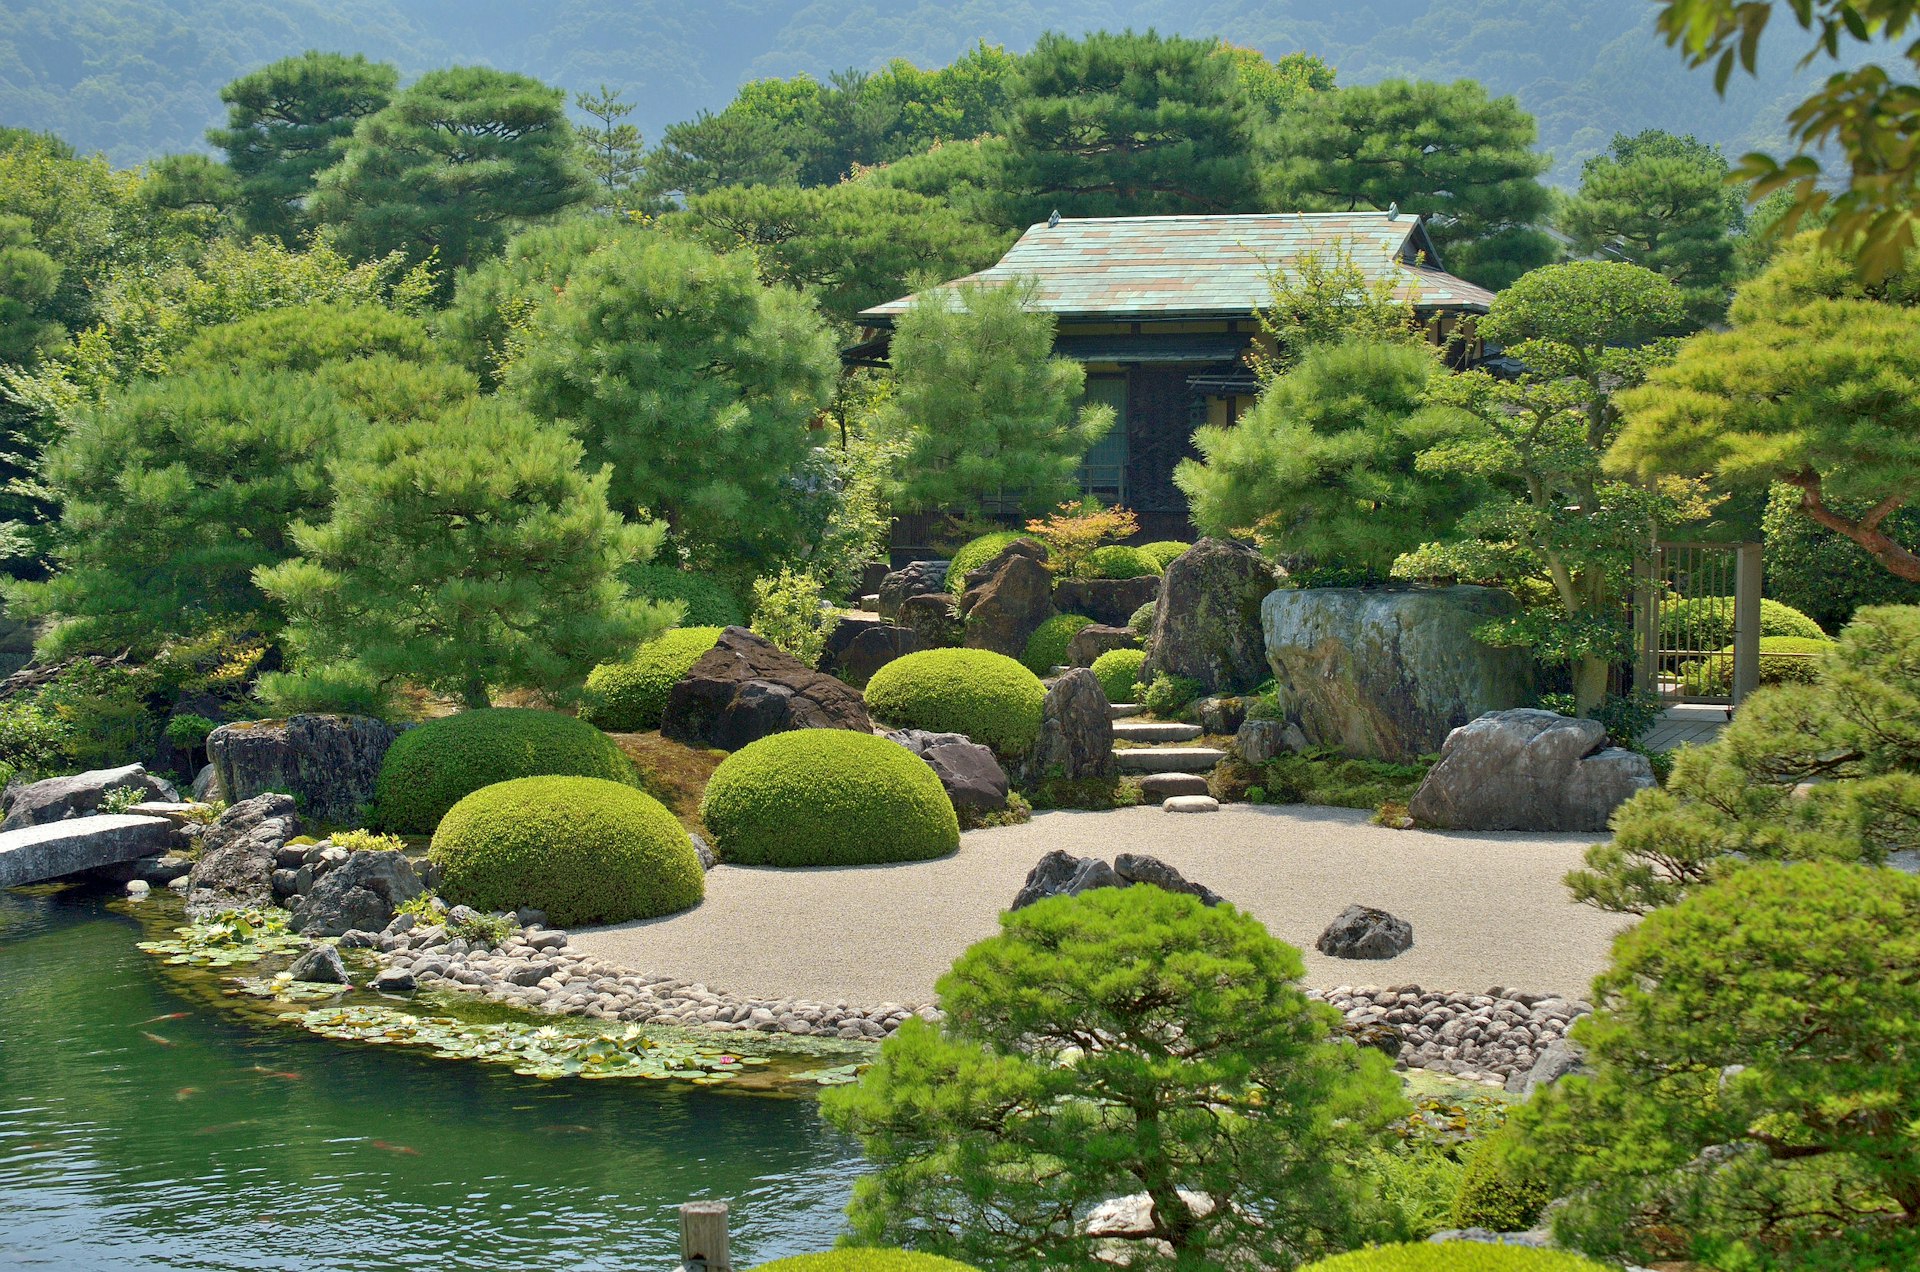 The Japanese garden at the Adachi Museum of Art in the Shimane Prefecture